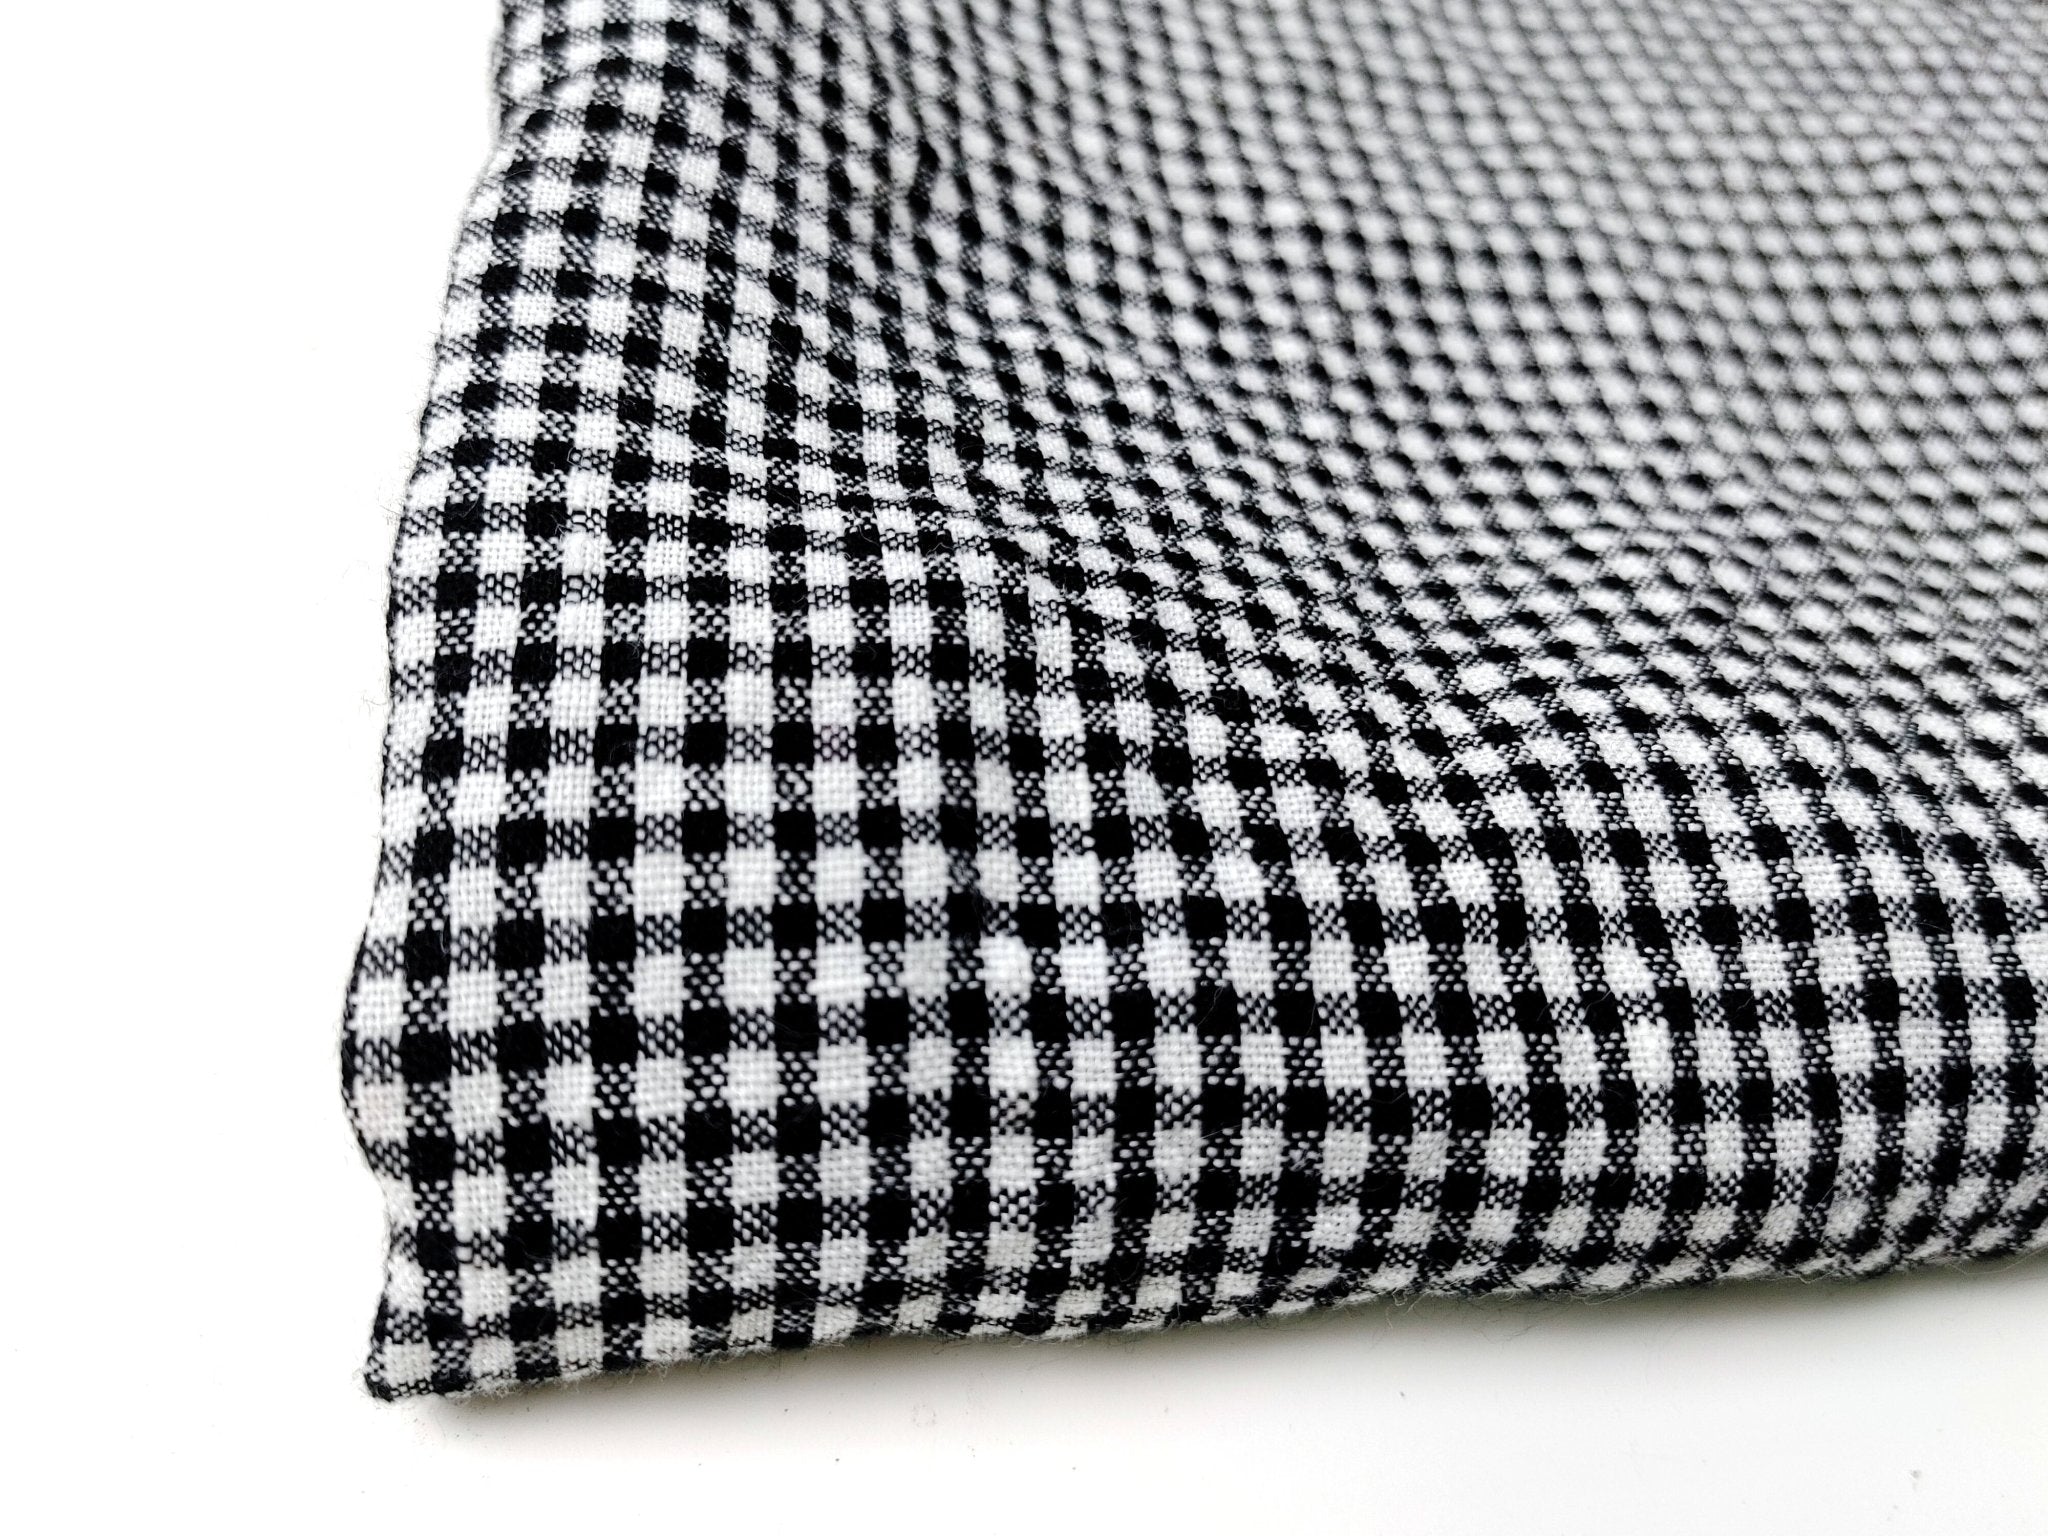 Light Weight Linen Tencel Fabric with Subtle Seersucker Gingham Check in Classic White & Black 6345 - The Linen Lab - Black & White